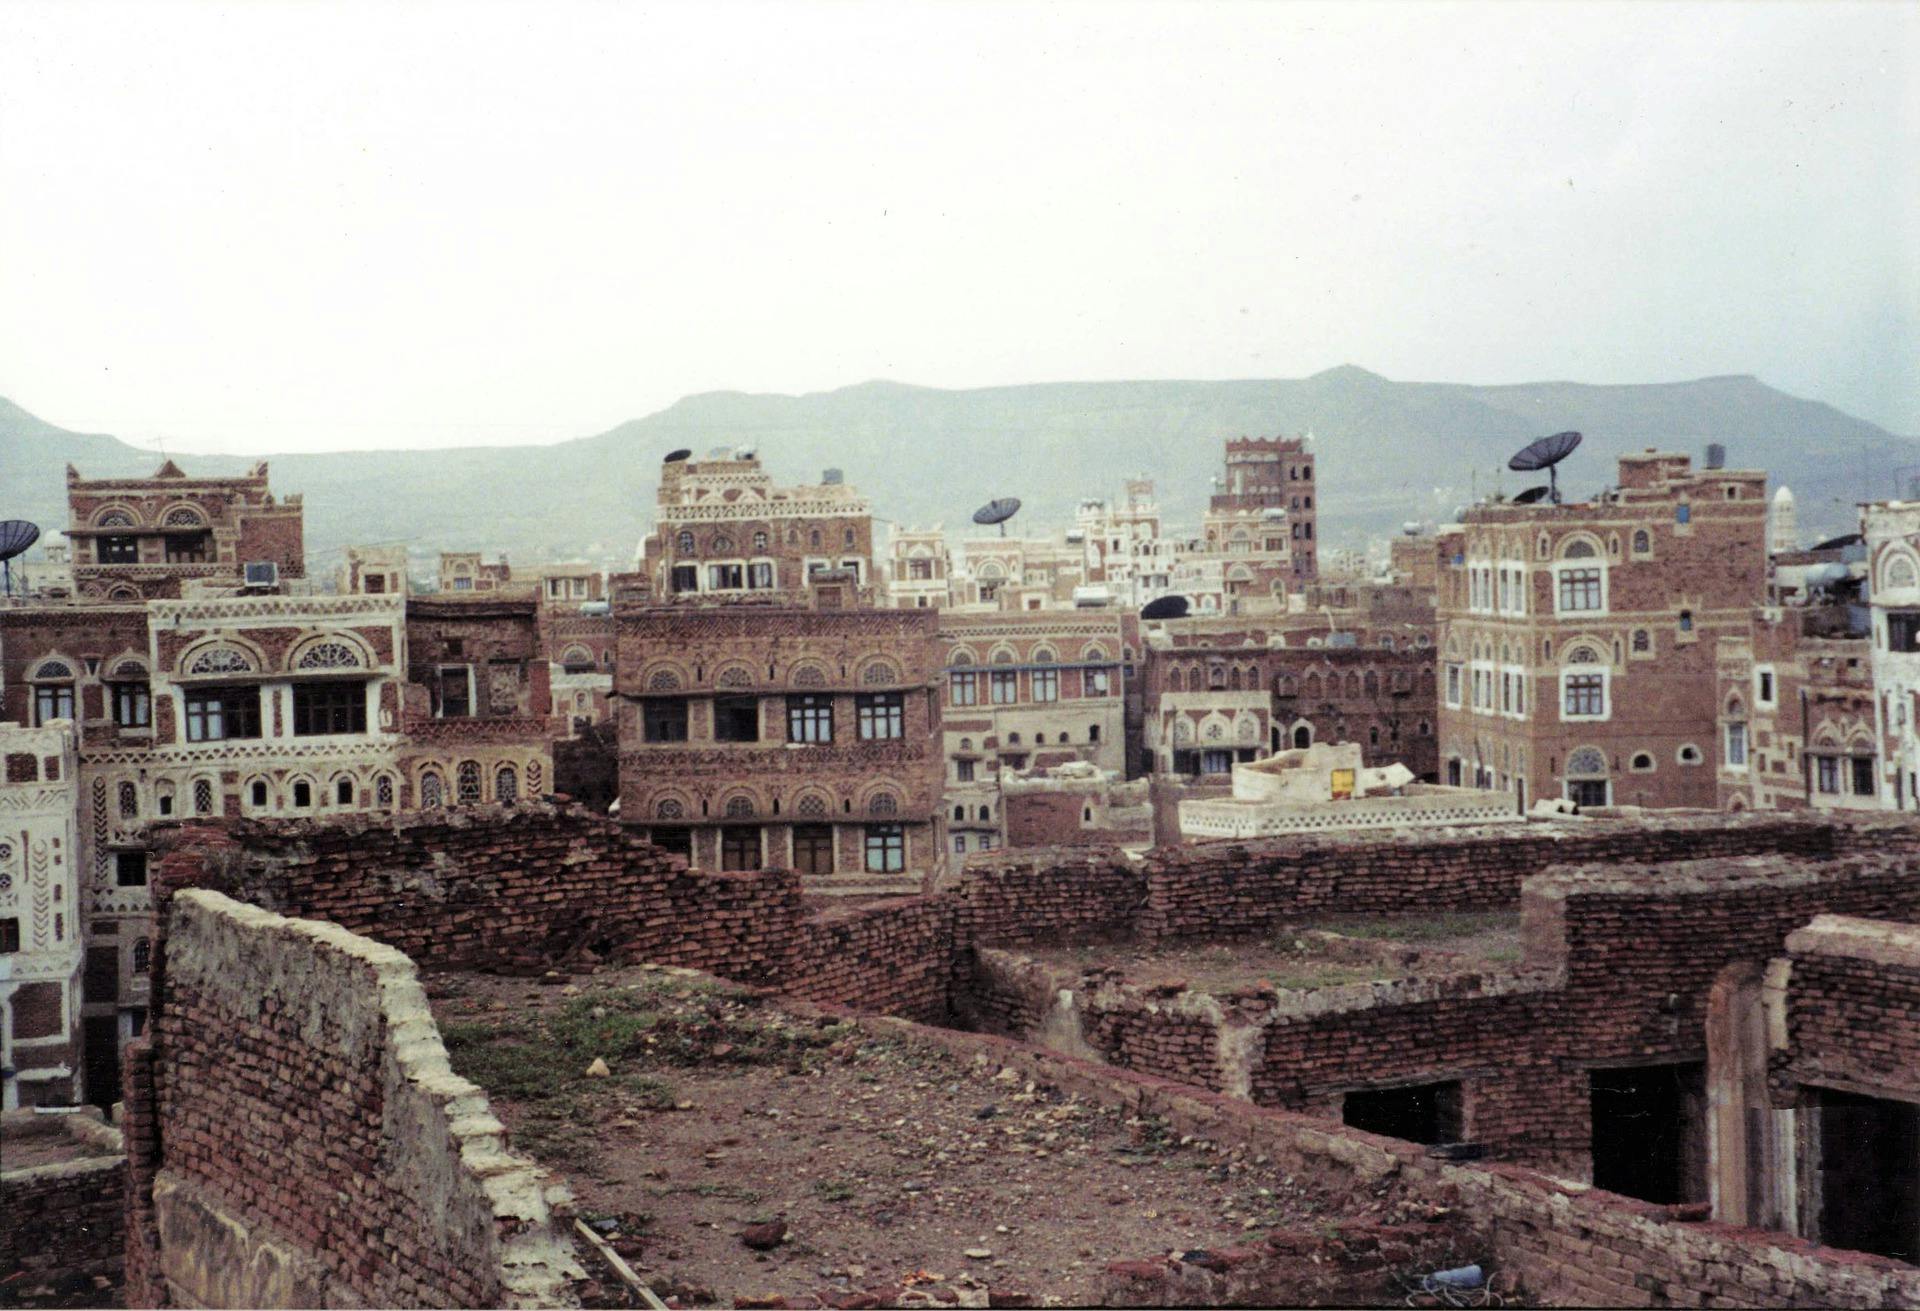 Houses in Yemen and mountains in the background.